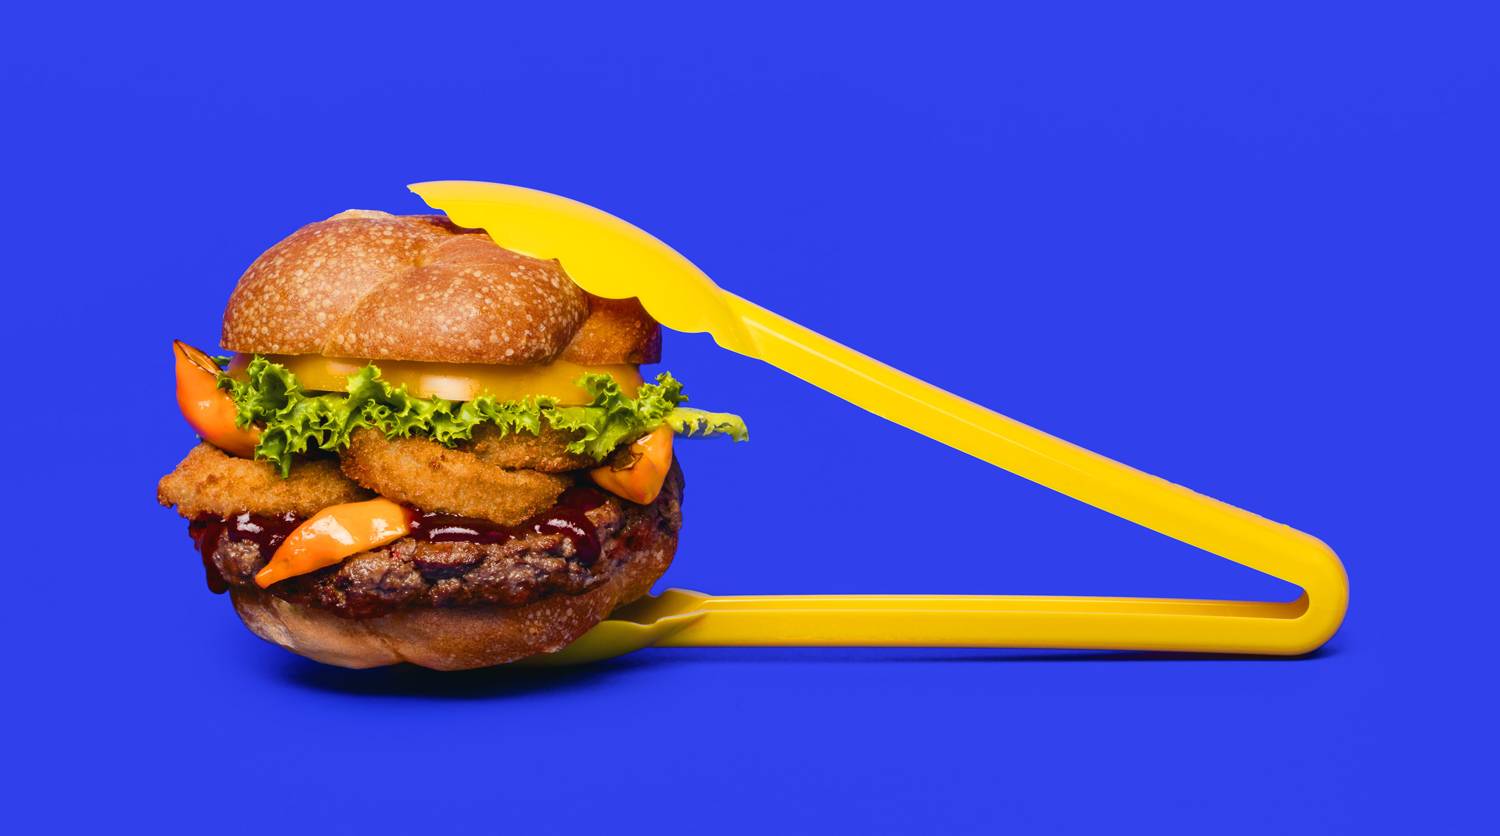 Image of burger with all fixings